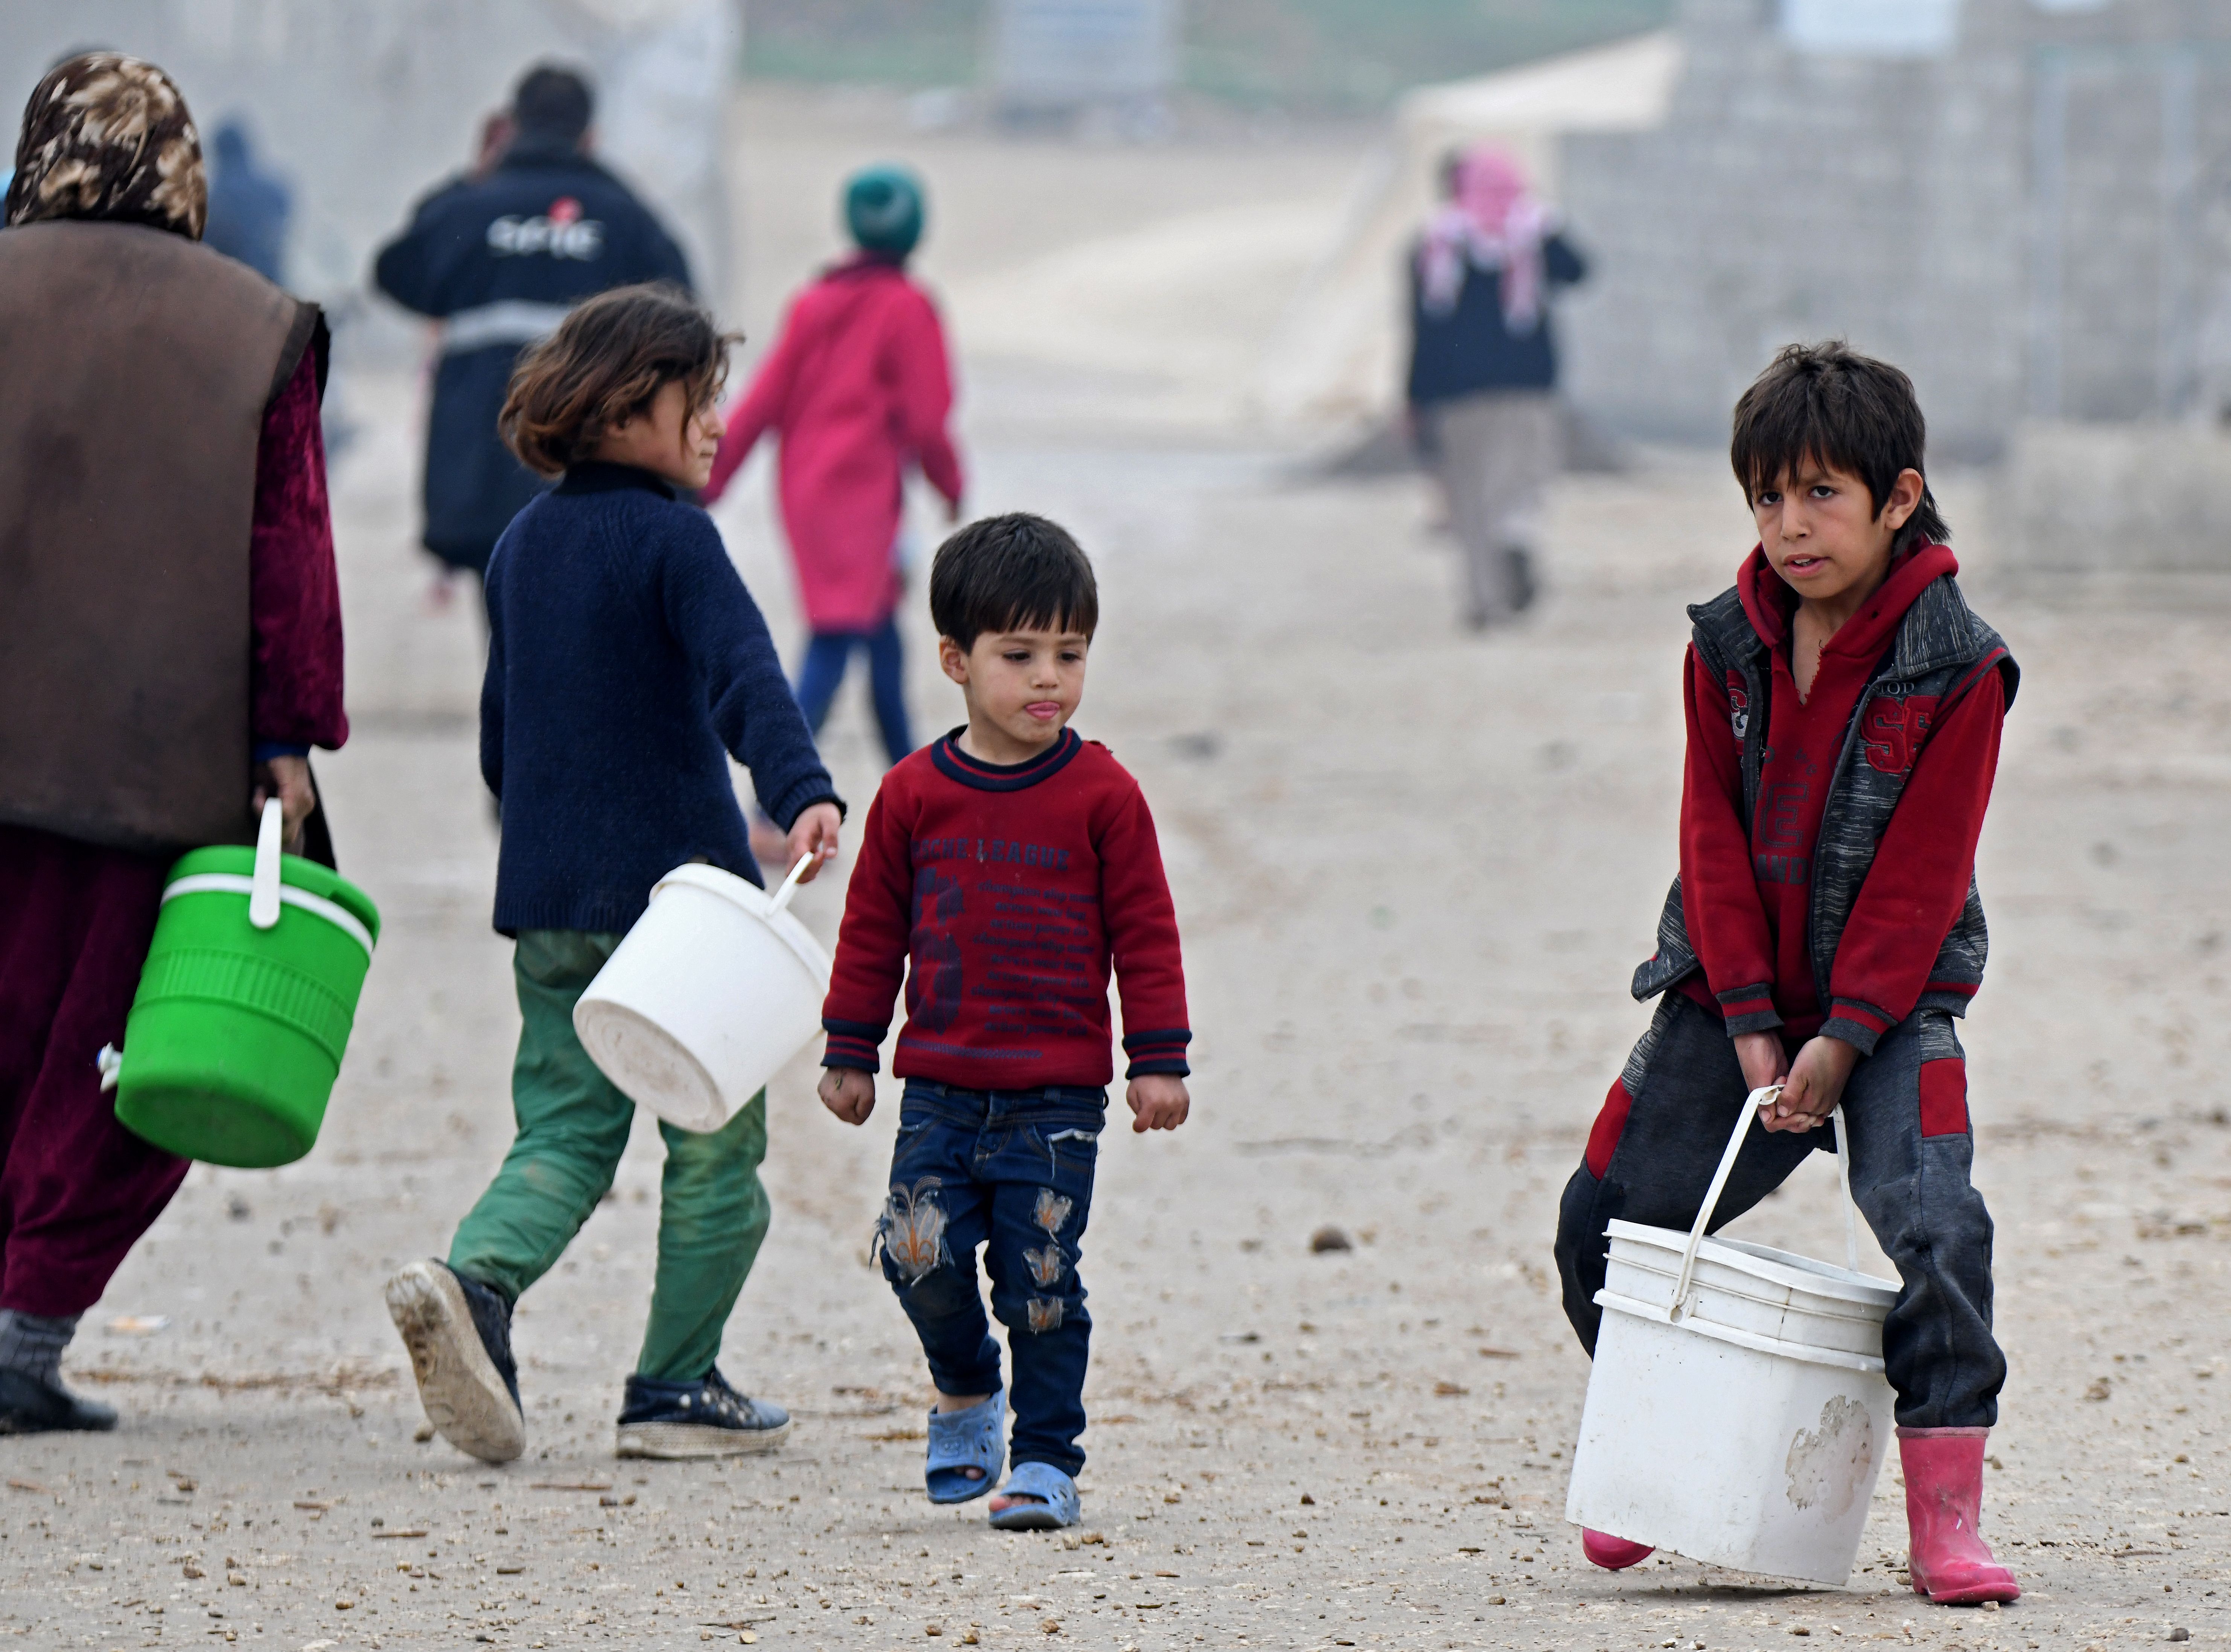 A displaced Syrian boy carries a bucket of humanitarian aid, consisting of heating material and drinking water, at a camp in the town of Mehmediye, near the town of Deir al-Ballut along the border with Turkey, on February 21, 2020. (Photo by RAMI AL SAYED/AFP via Getty Images)